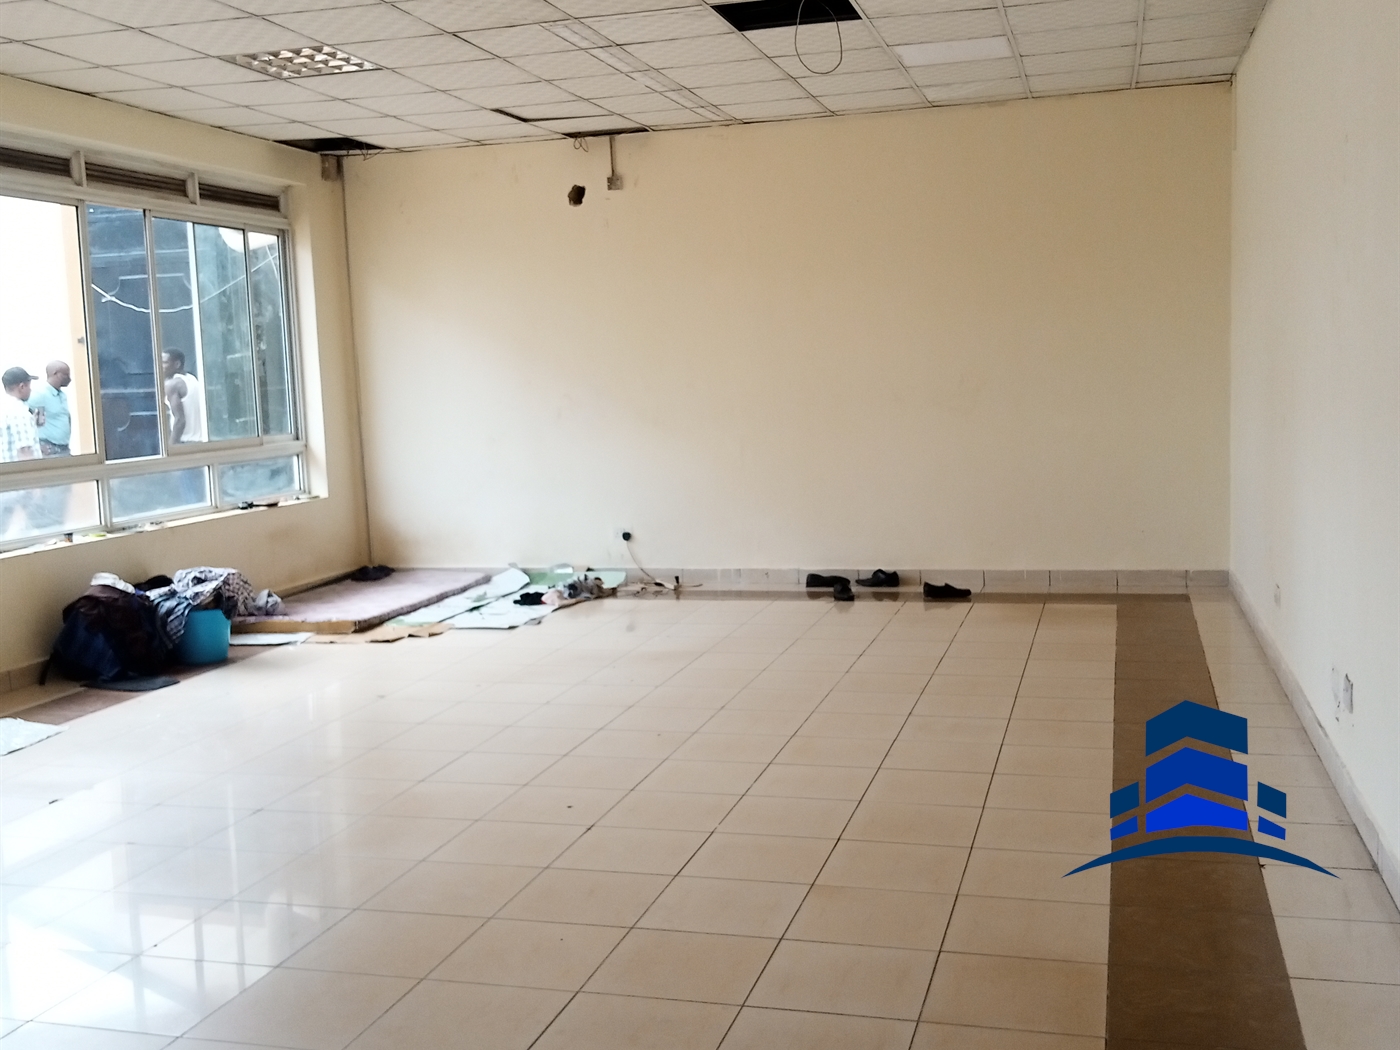 Warehouse for rent in Indistrialarea Kampala